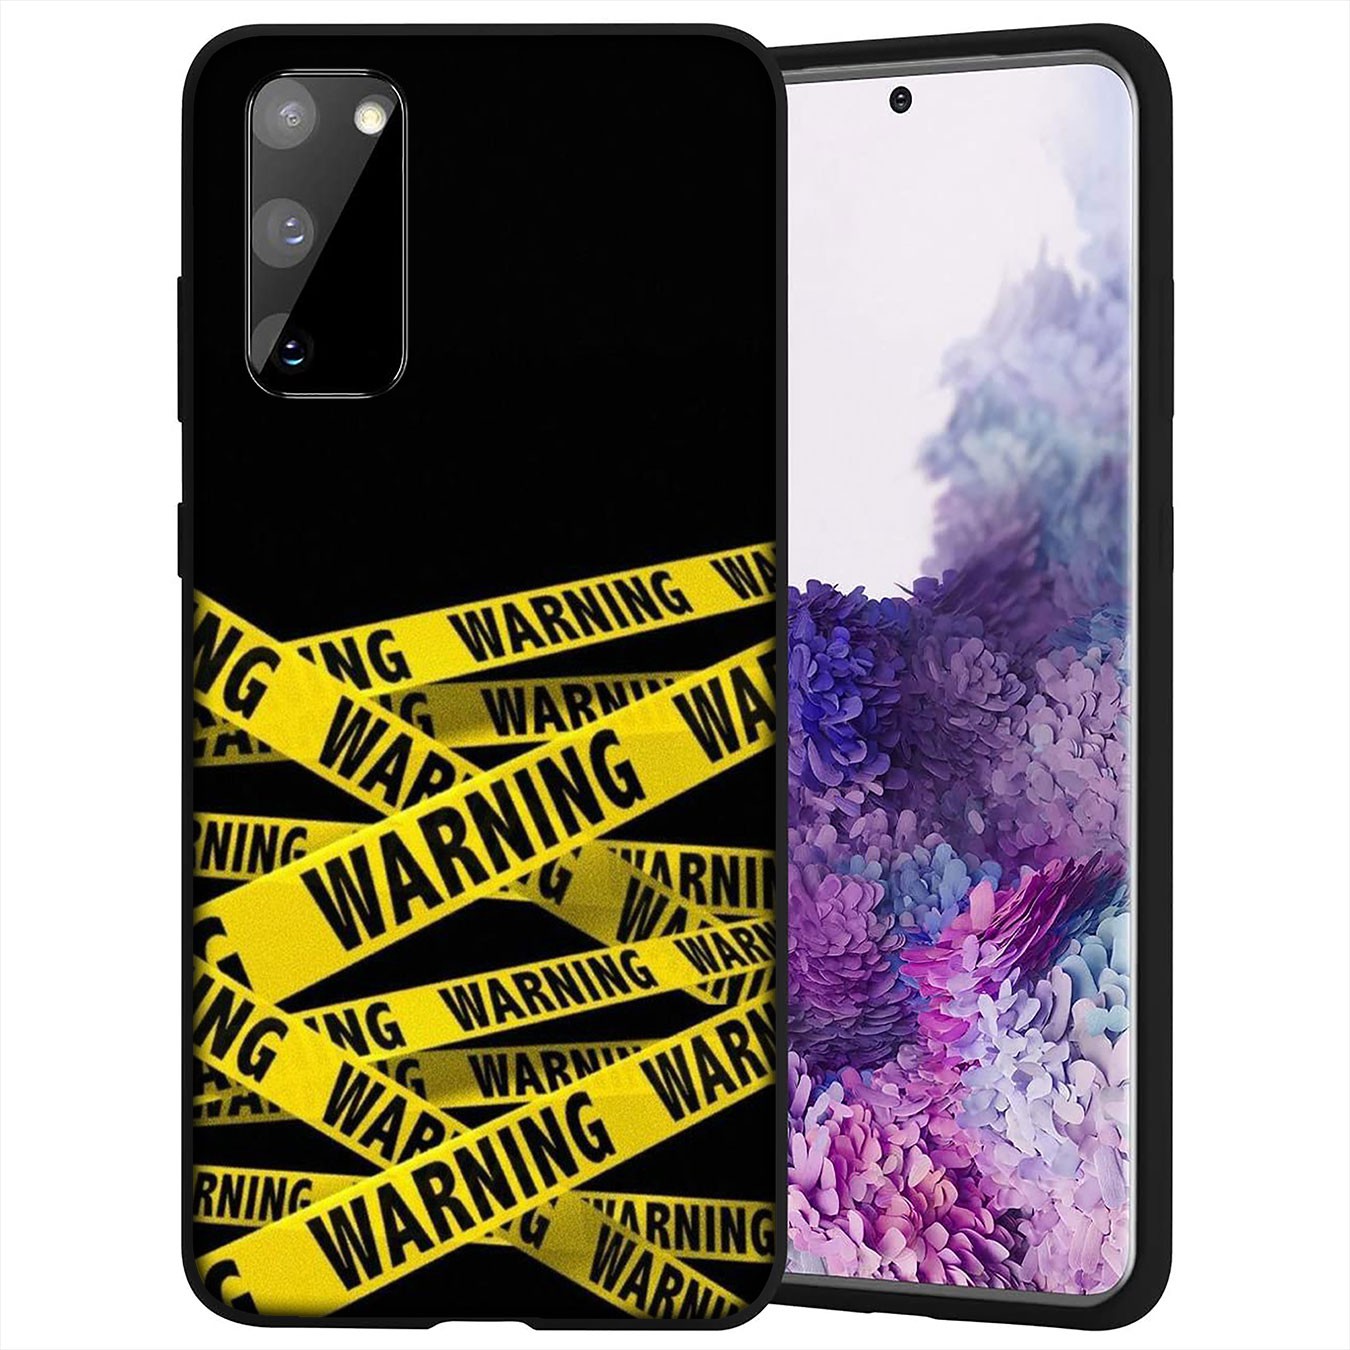 Samsung Galaxy S21 Ultra S8 Plus F62 M62 A2 A32 A52 A72 S21+ S8+ S21Plus Casing Soft Silicone black and Off White Phone Case